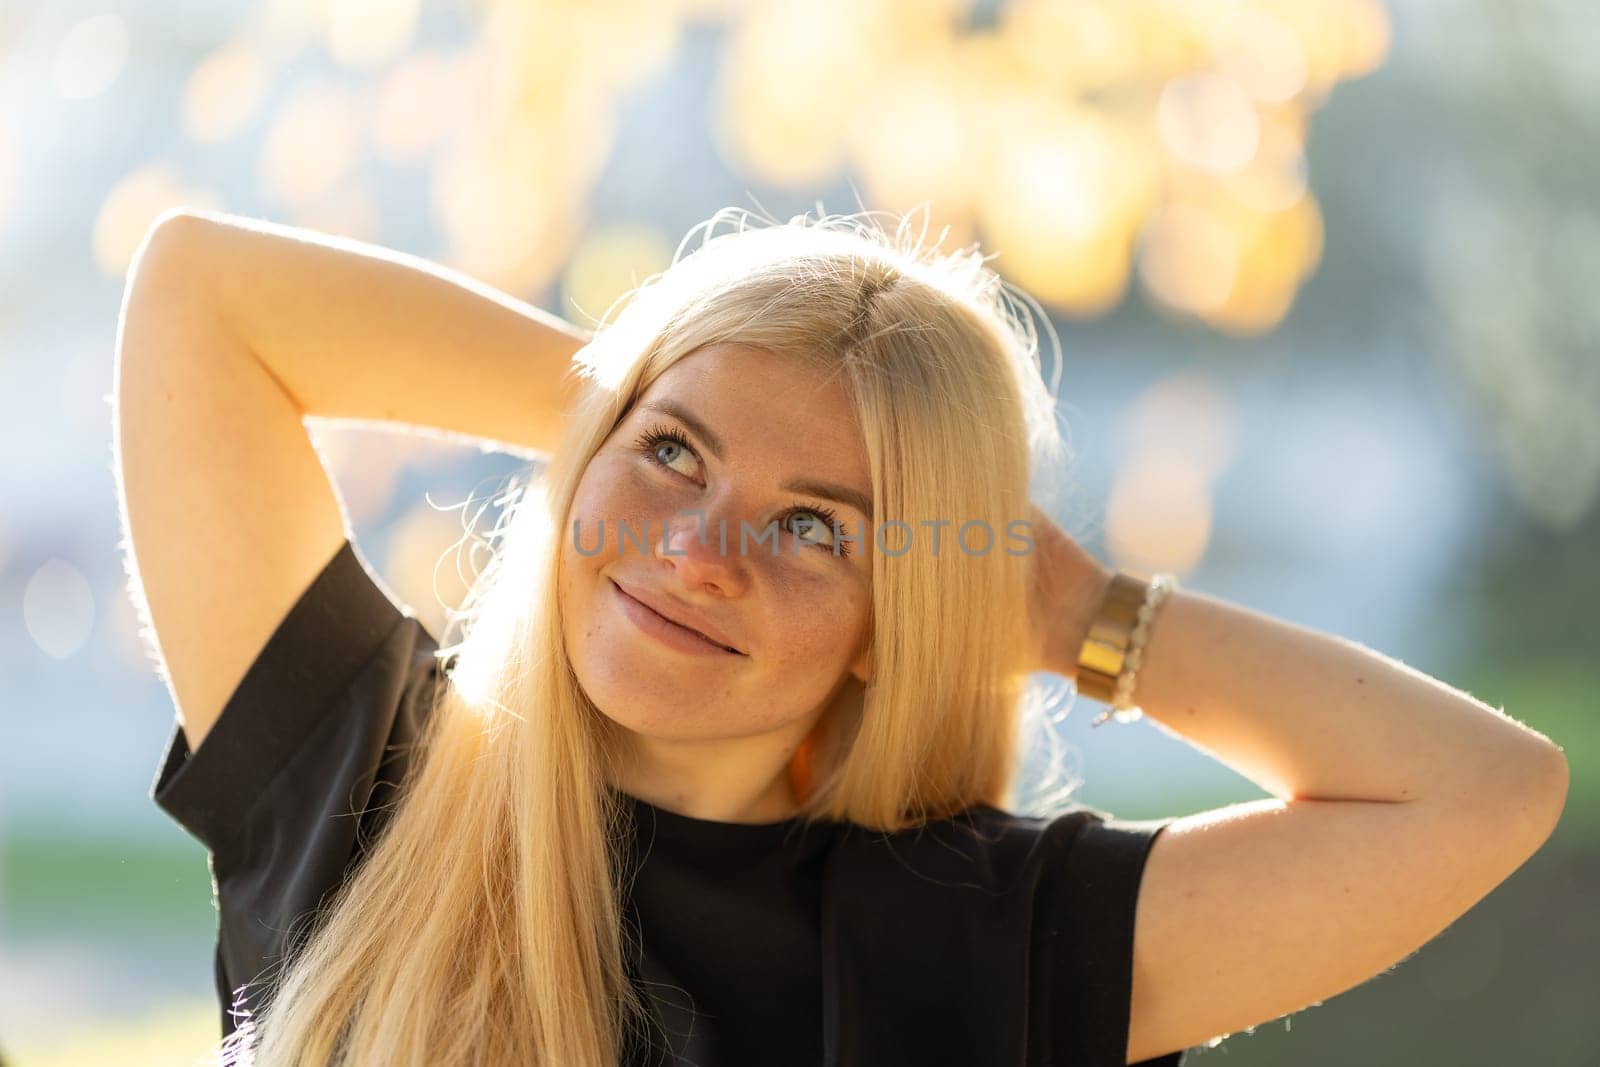 A young woman with blonde hair and braces is smiling as she poses for a picture in the park.